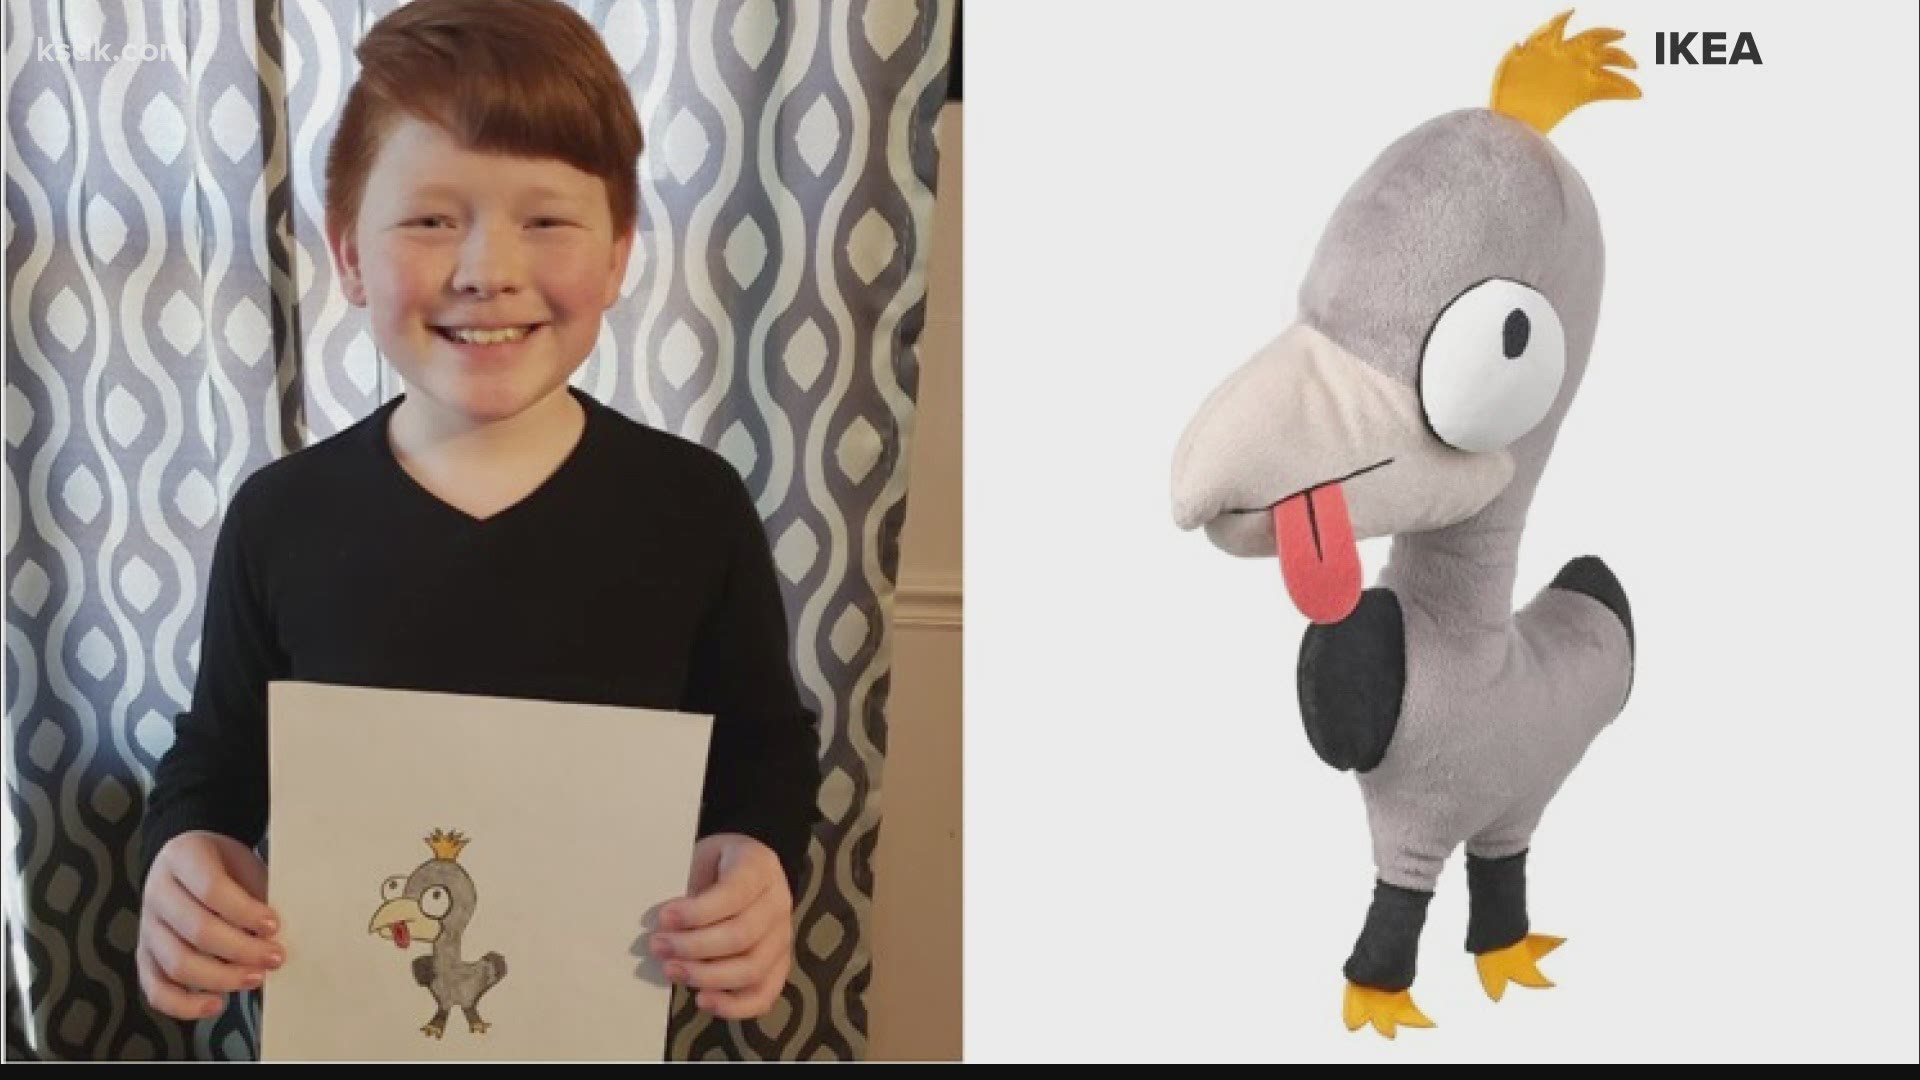 Collinsville boy's bird drawing wins worldwide IKEA competition 